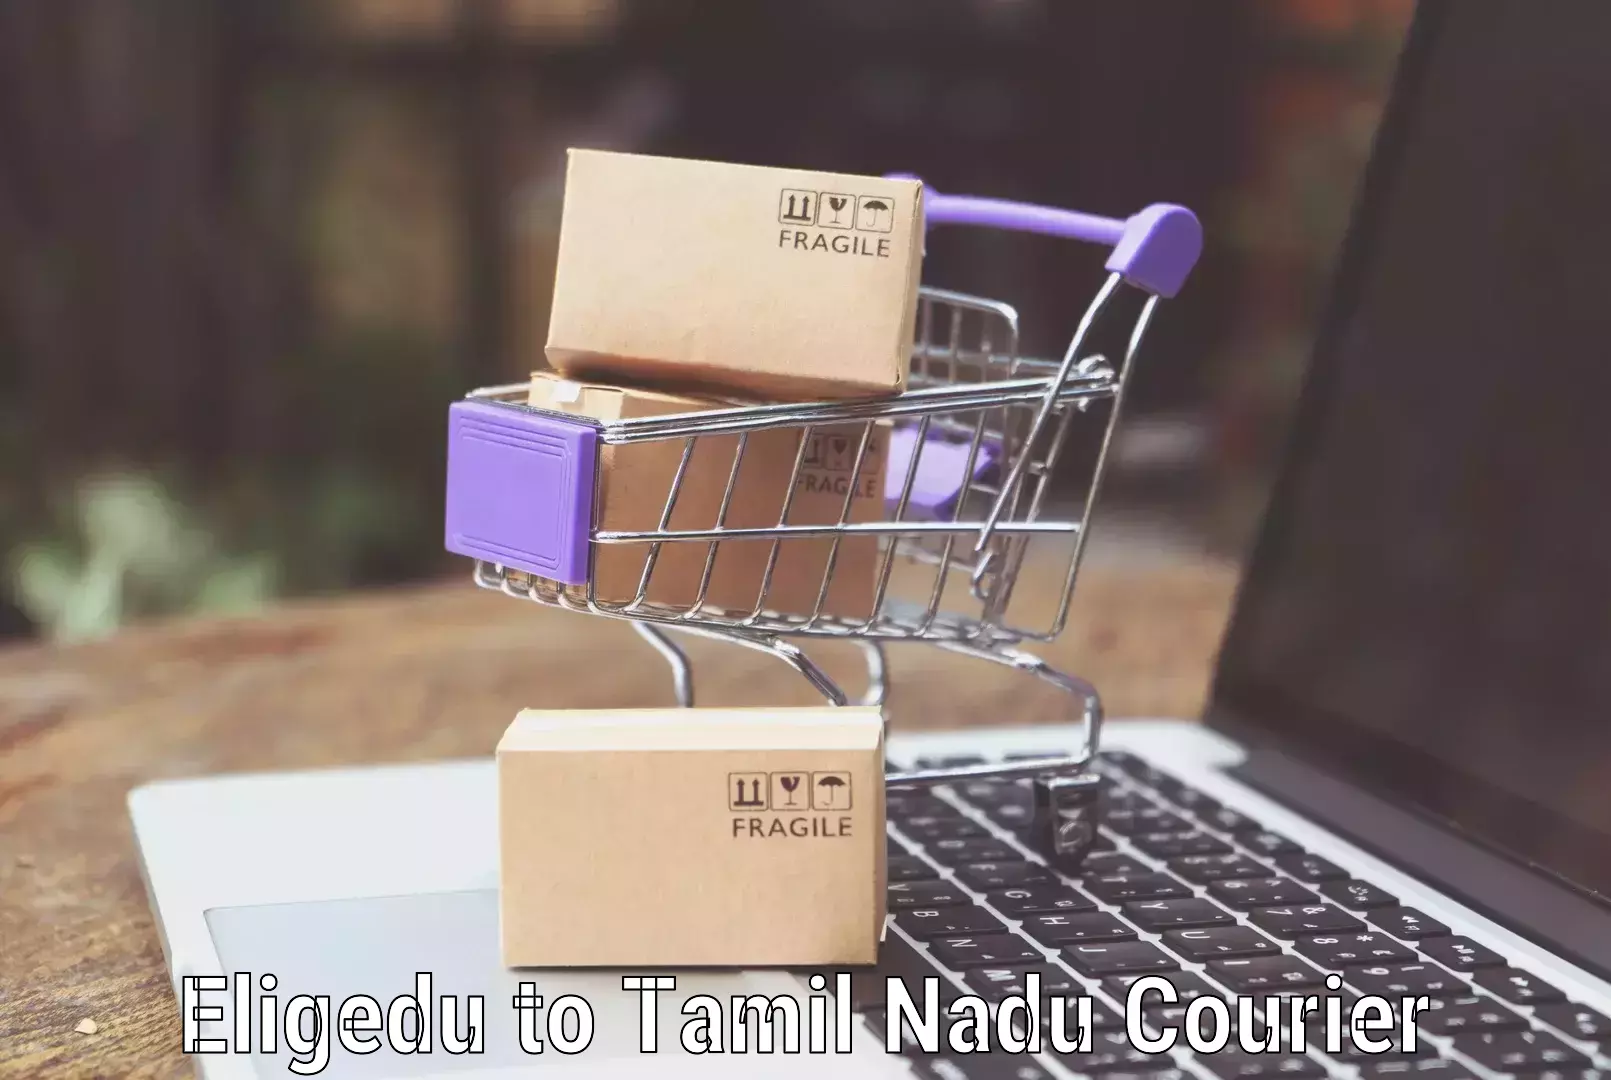 Express luggage delivery Eligedu to Tamil Nadu